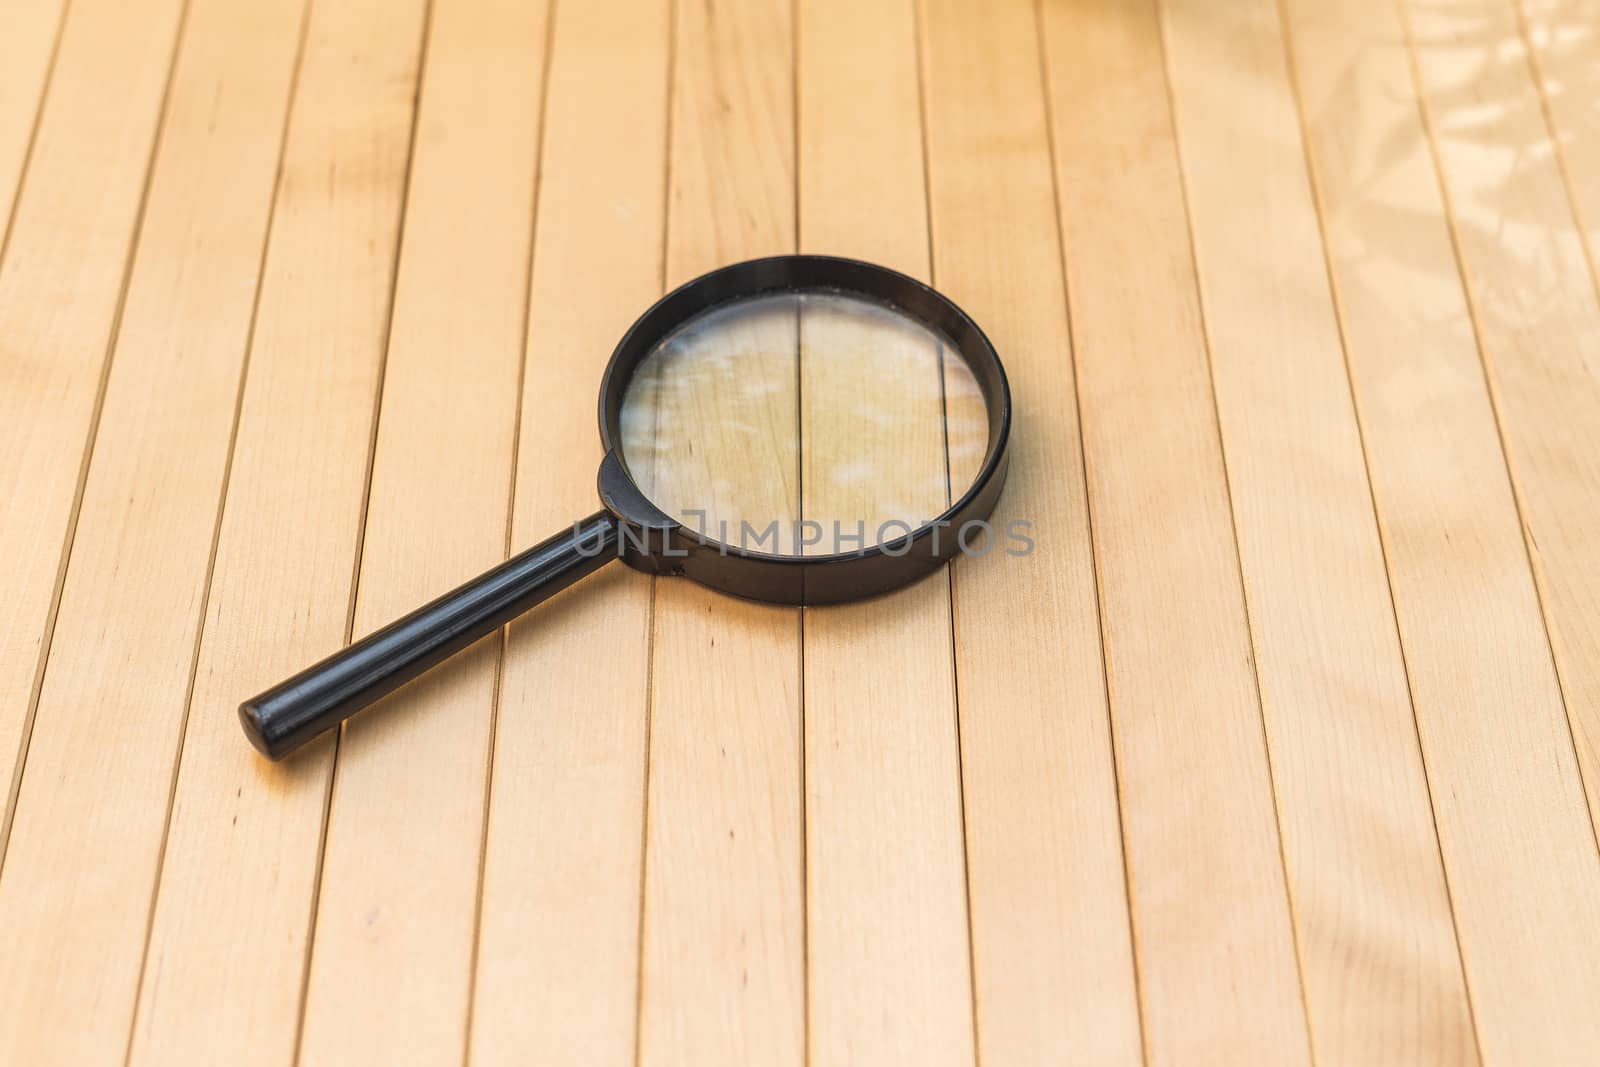 Magnifying glass on wooden background by boys1983@mail.ru